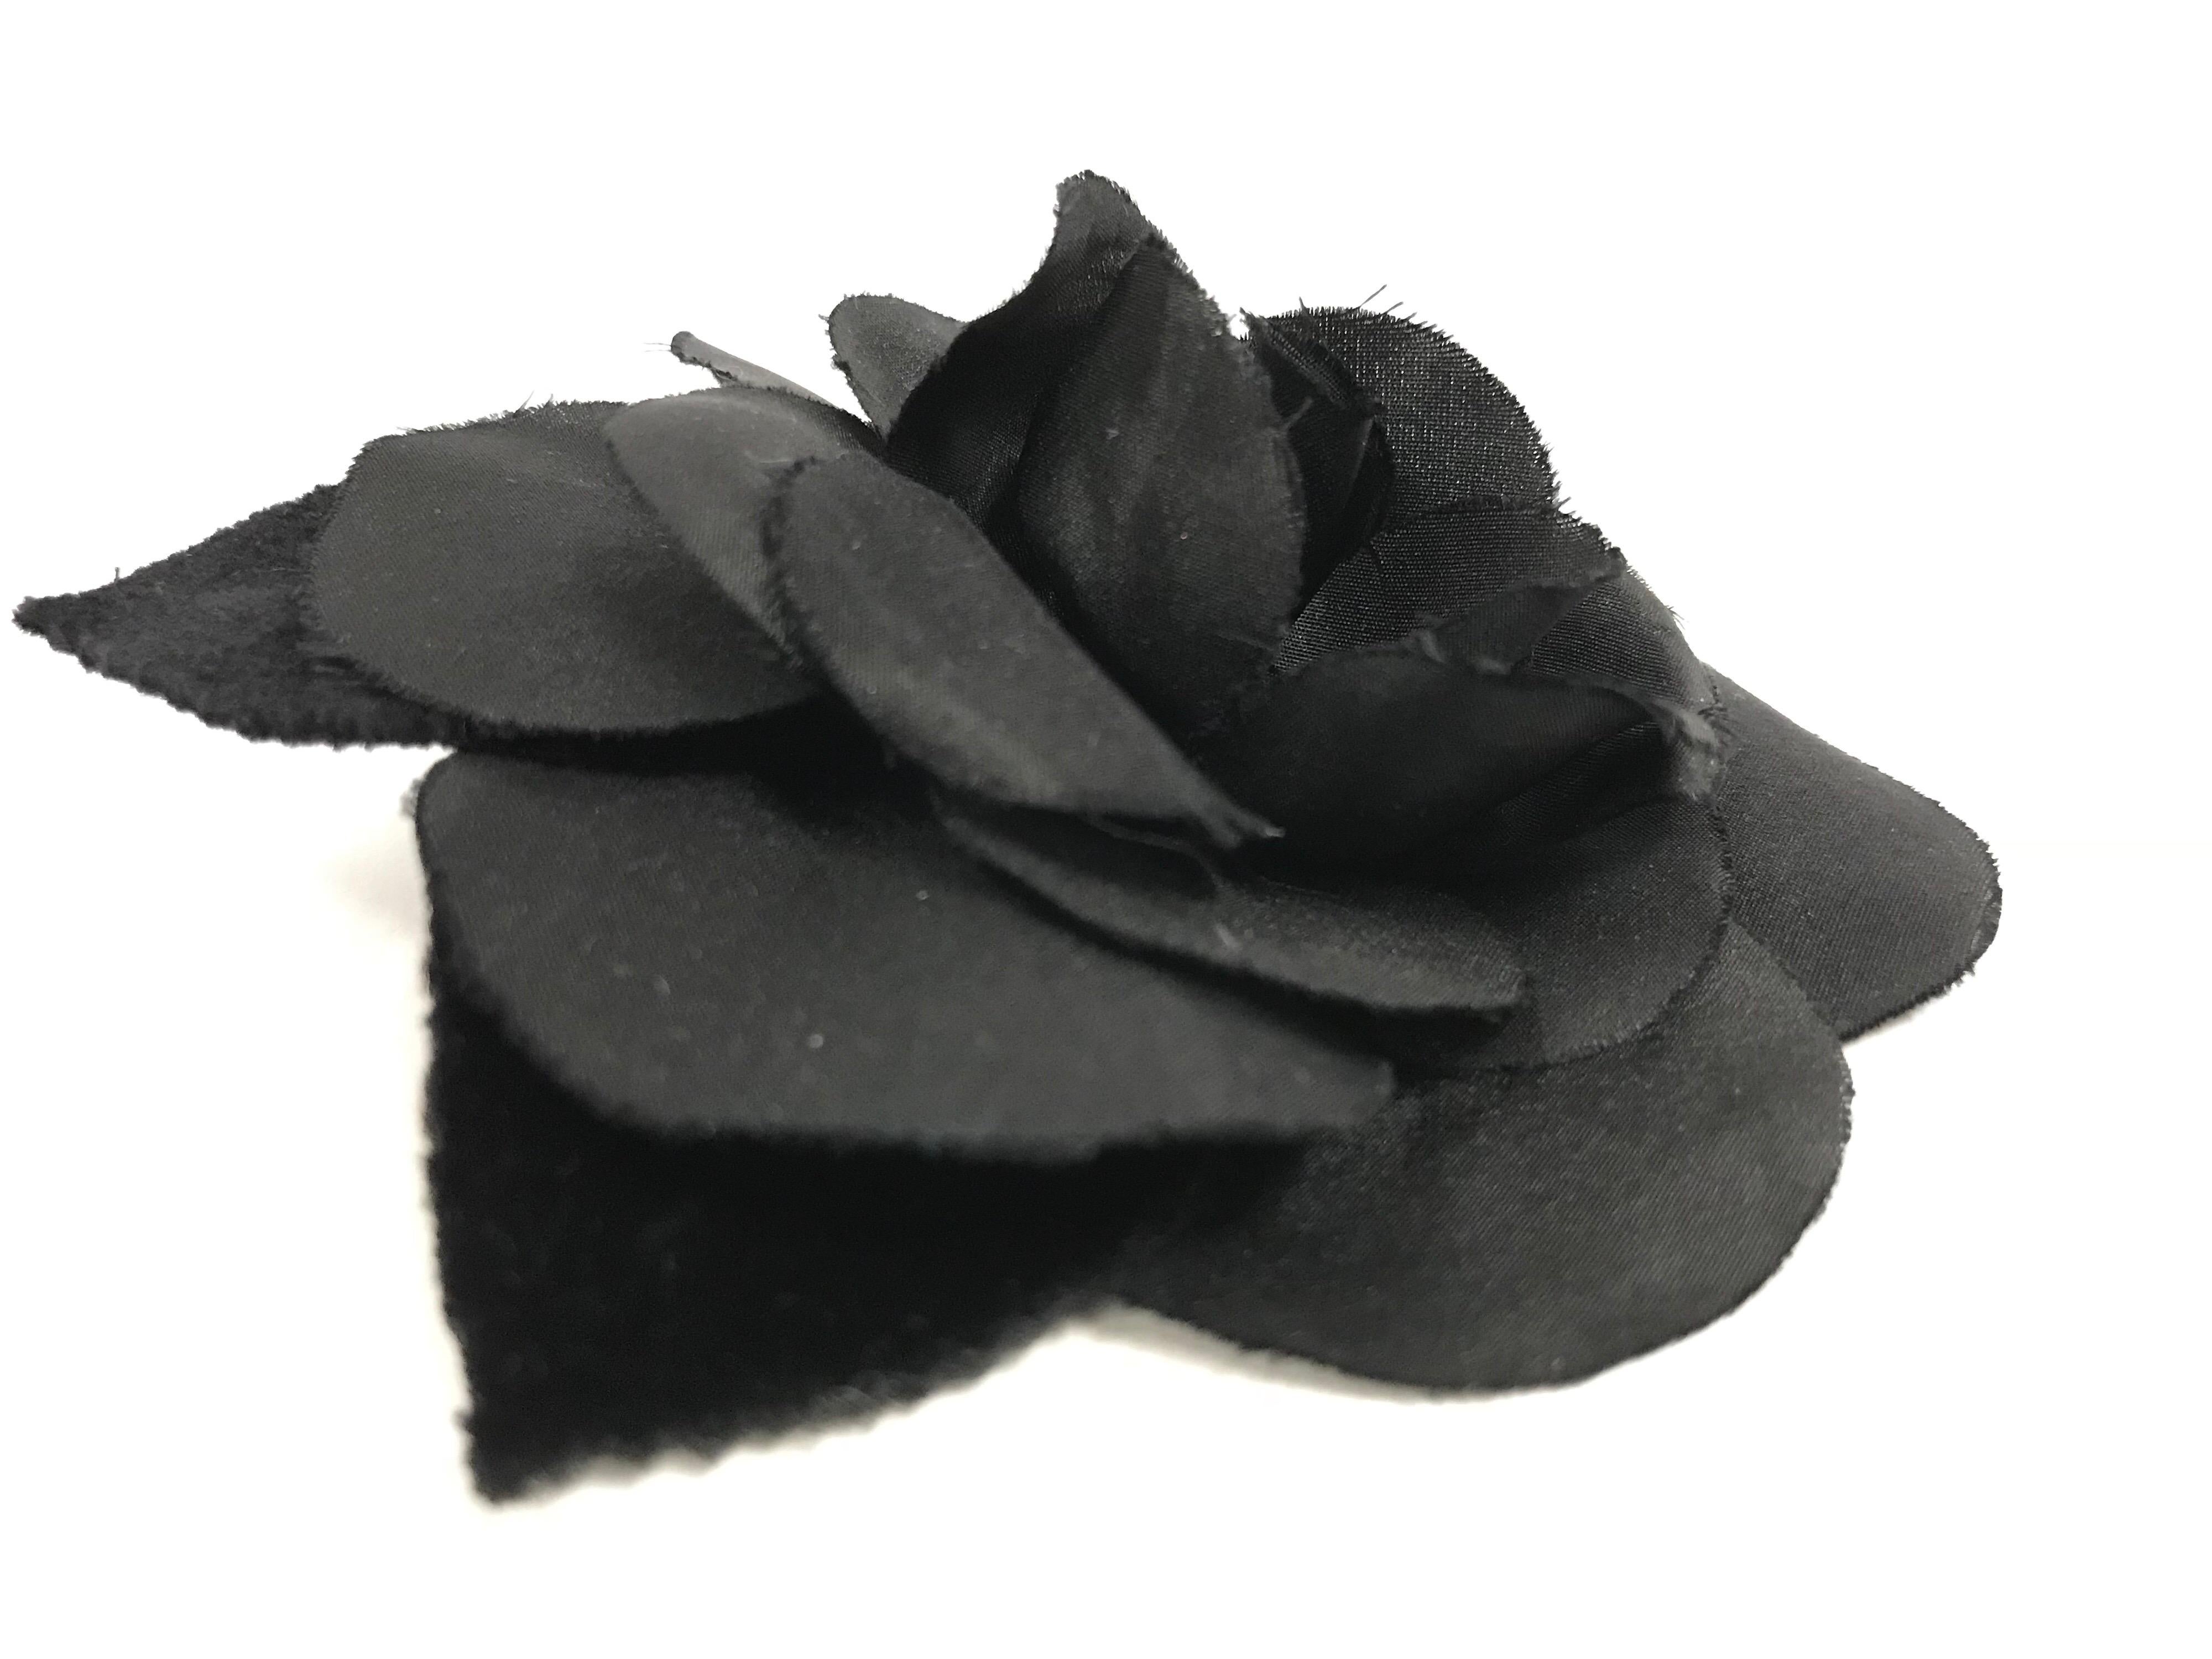 Elegant silk and velvet camellia brooch by Chanel. The black floral brooch is composed of a fabric camellia made up of multiple layers of silk petals, backed by two camellia leaves. There is a pin clip on the underside of the brooch, as well as a